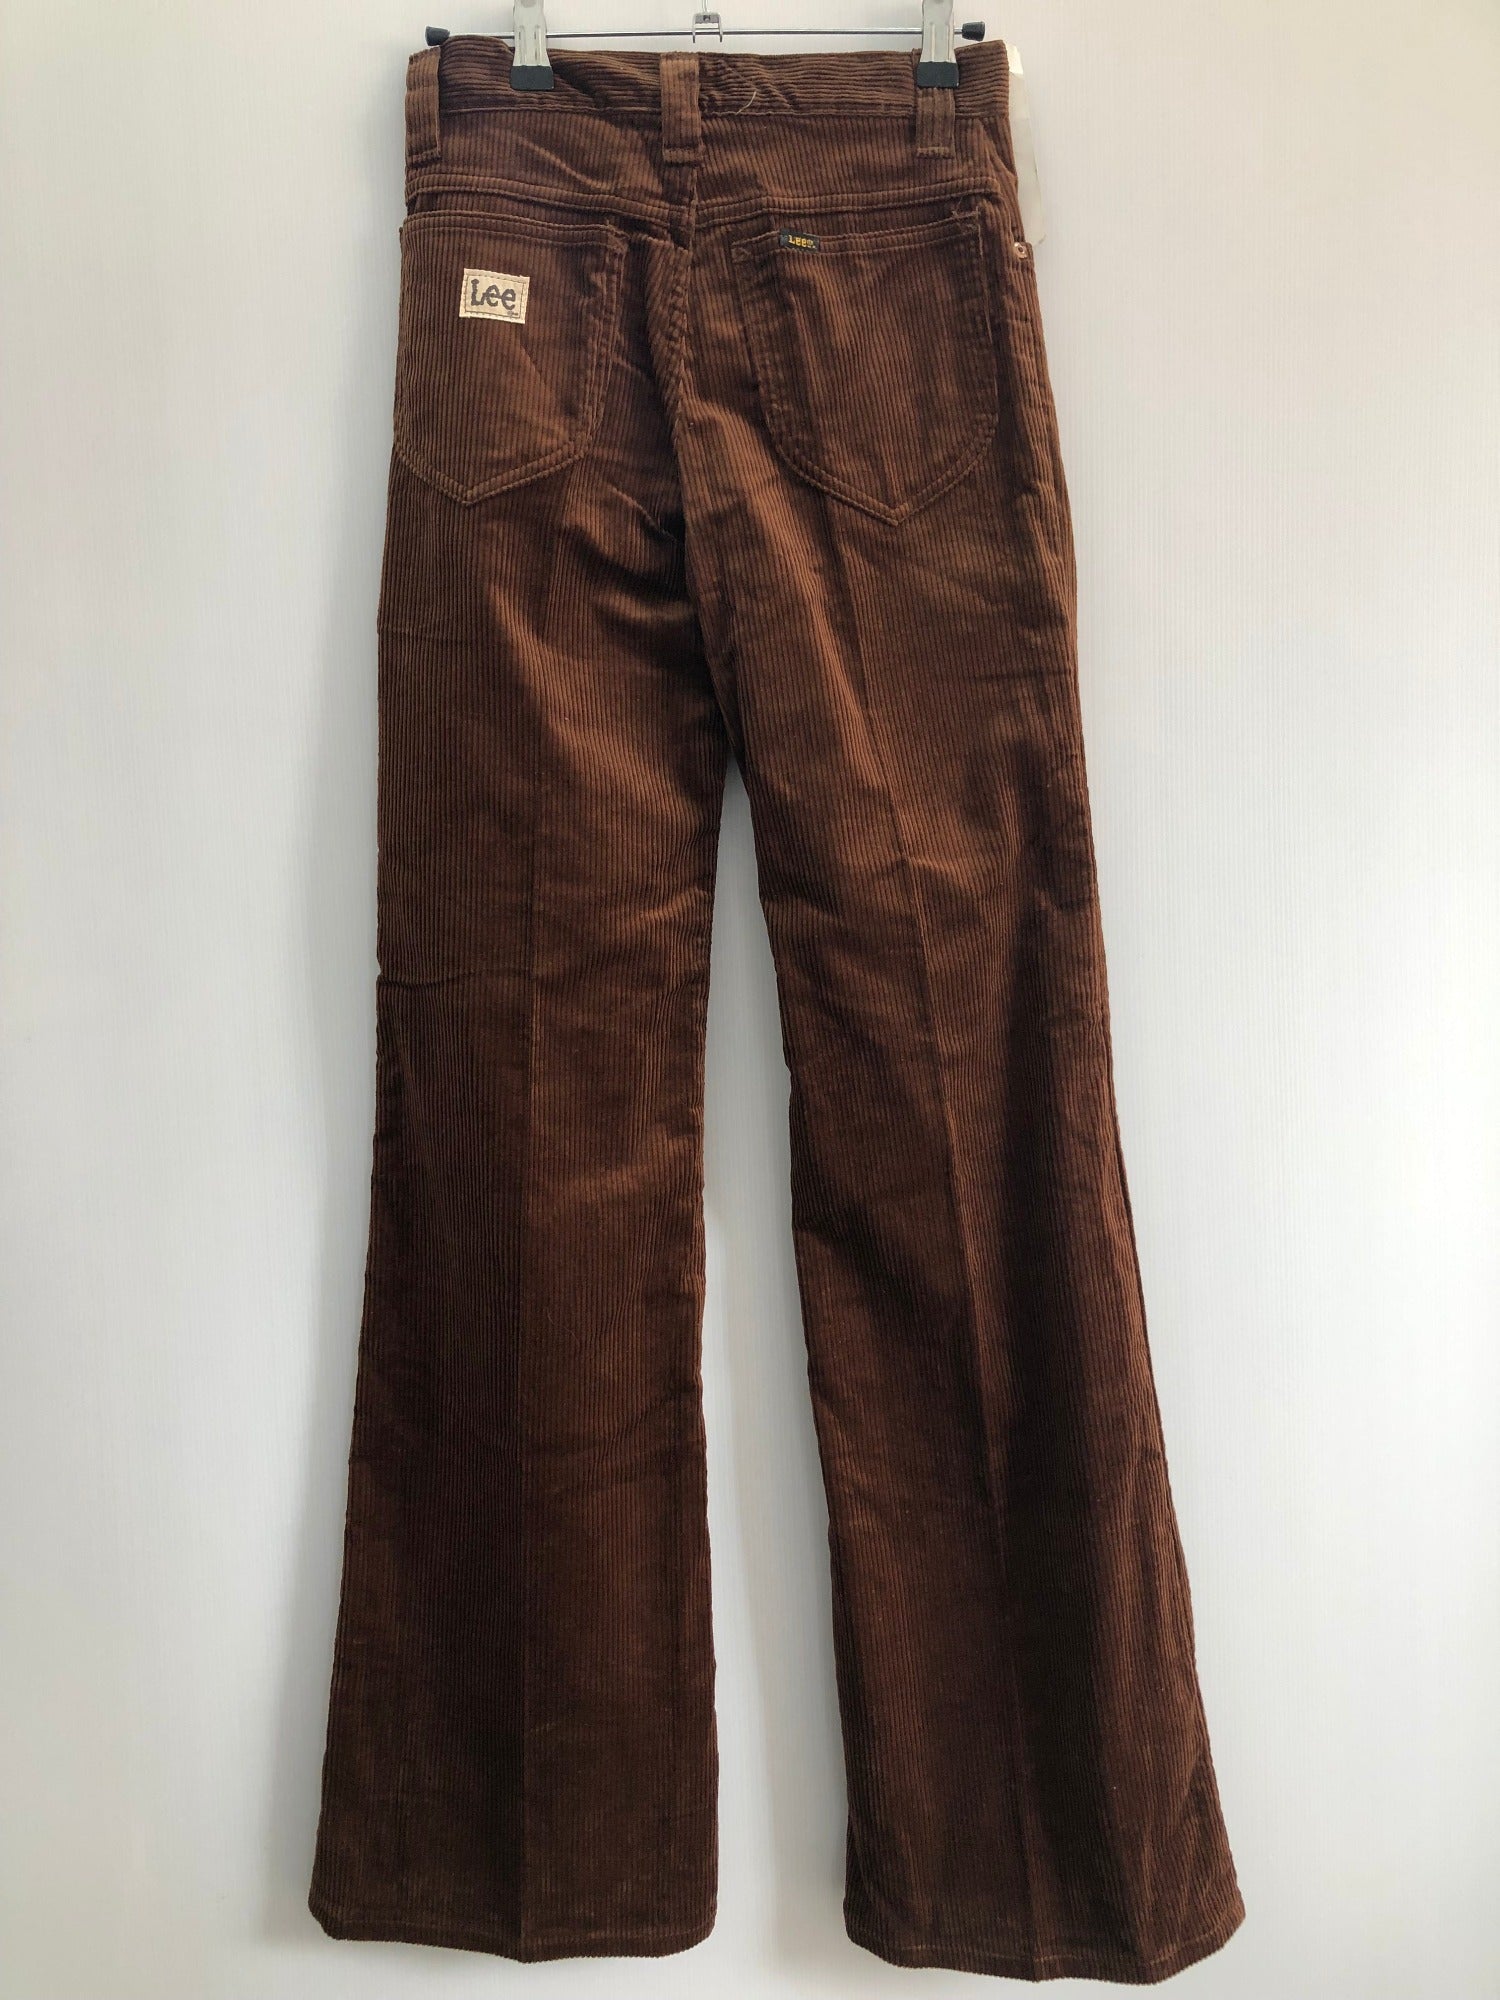 Vintage Deadstock 1970s Flared Bootcut Cords Corduroy Trousers in Brown by  Lee  Size UK 6 Petite  W24 L32  Womens Vintage Clothing  Urban Village   UrbanVillageVintage